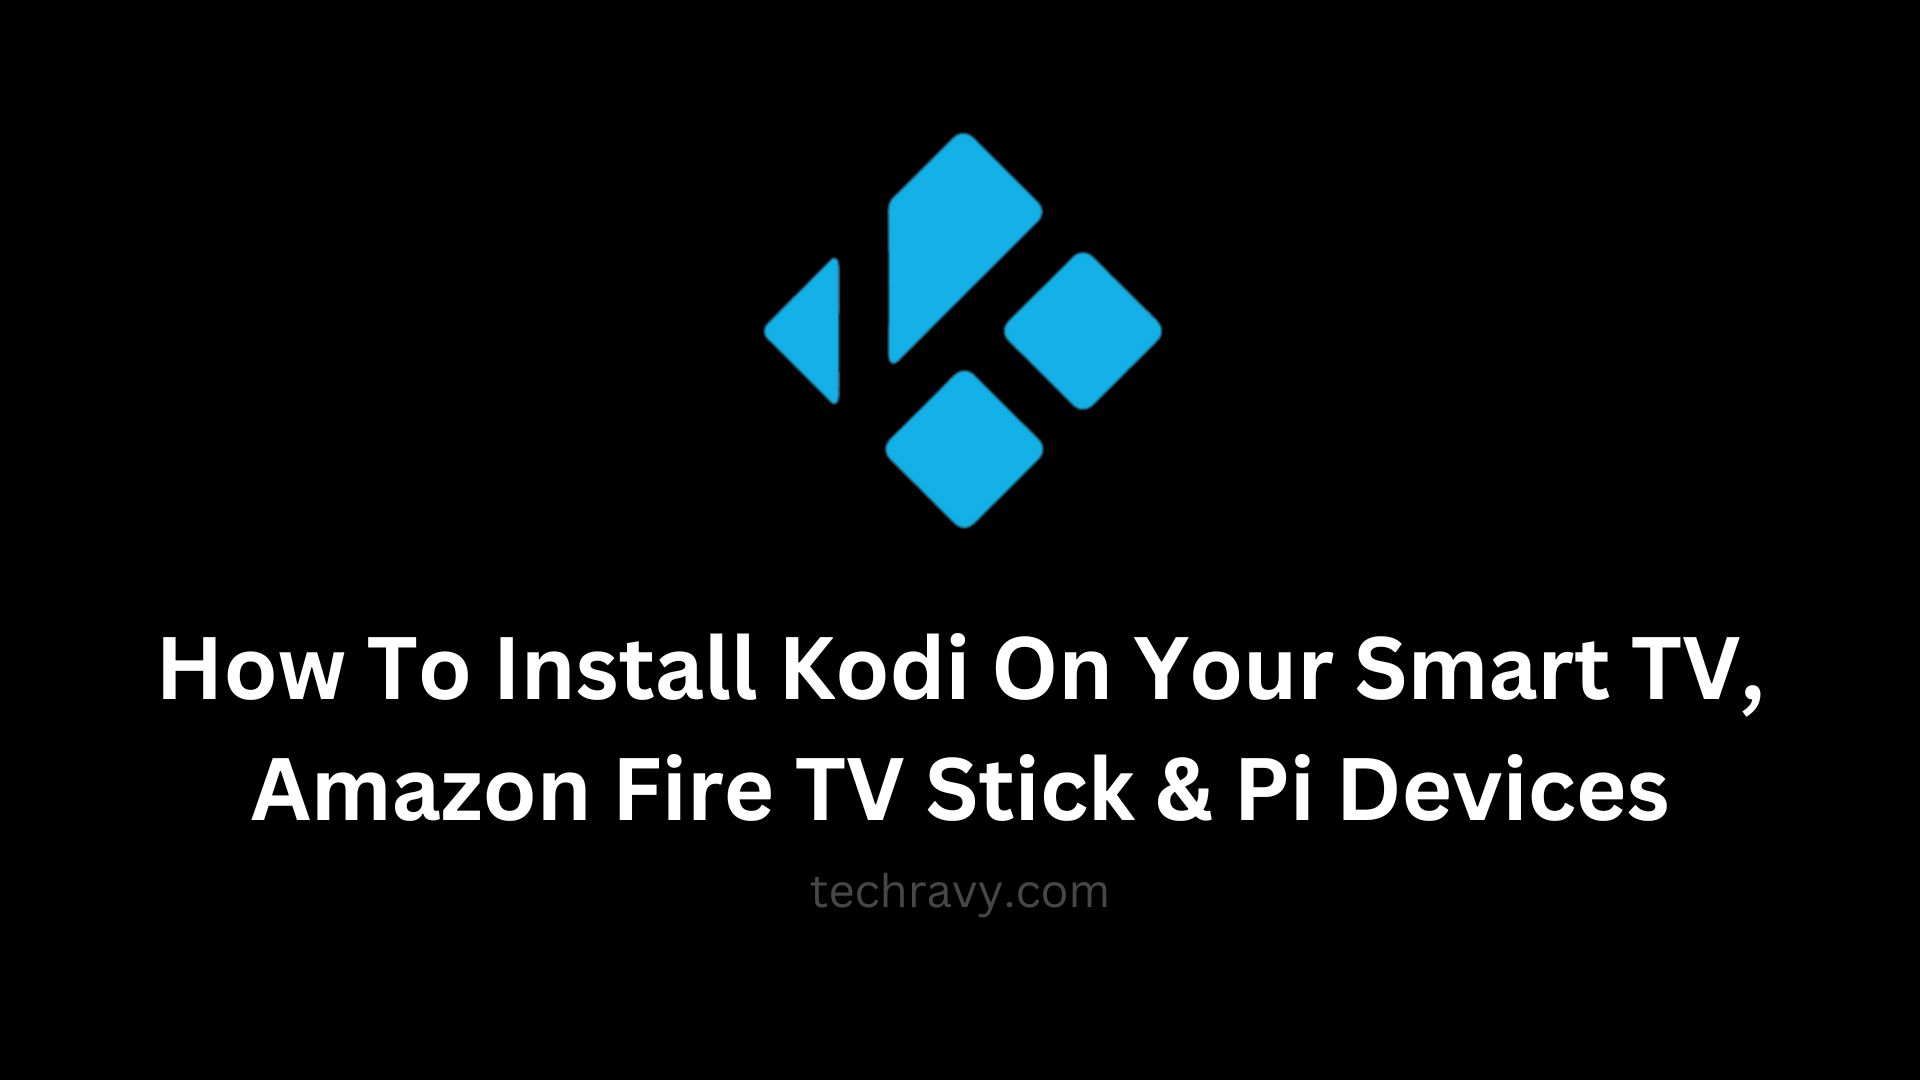 How To Install Kodi On Your Smart TV, Amazon Fire TV Stick & Pi Devices